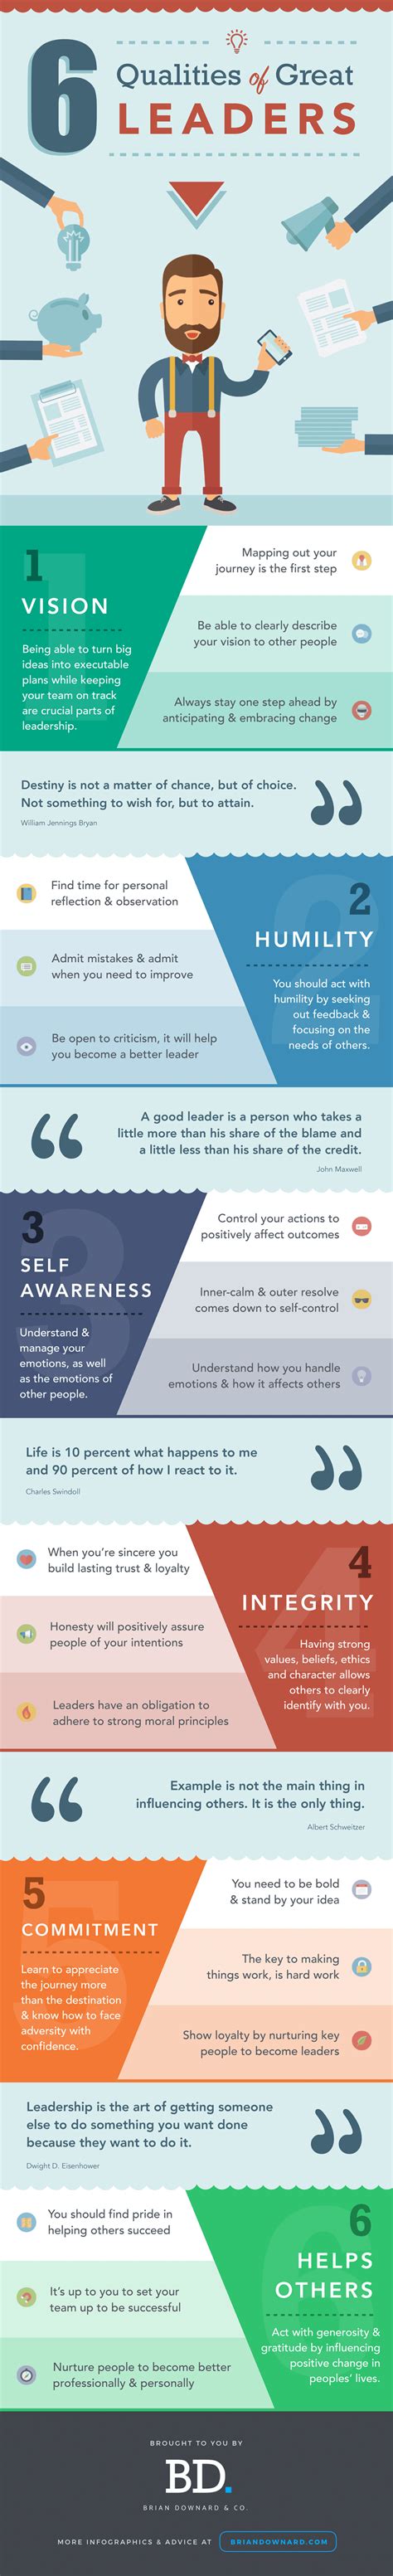 Leadership is an intangible quality with no clear definition. 6 Most Important Qualities of Great Leaders (Infographic)